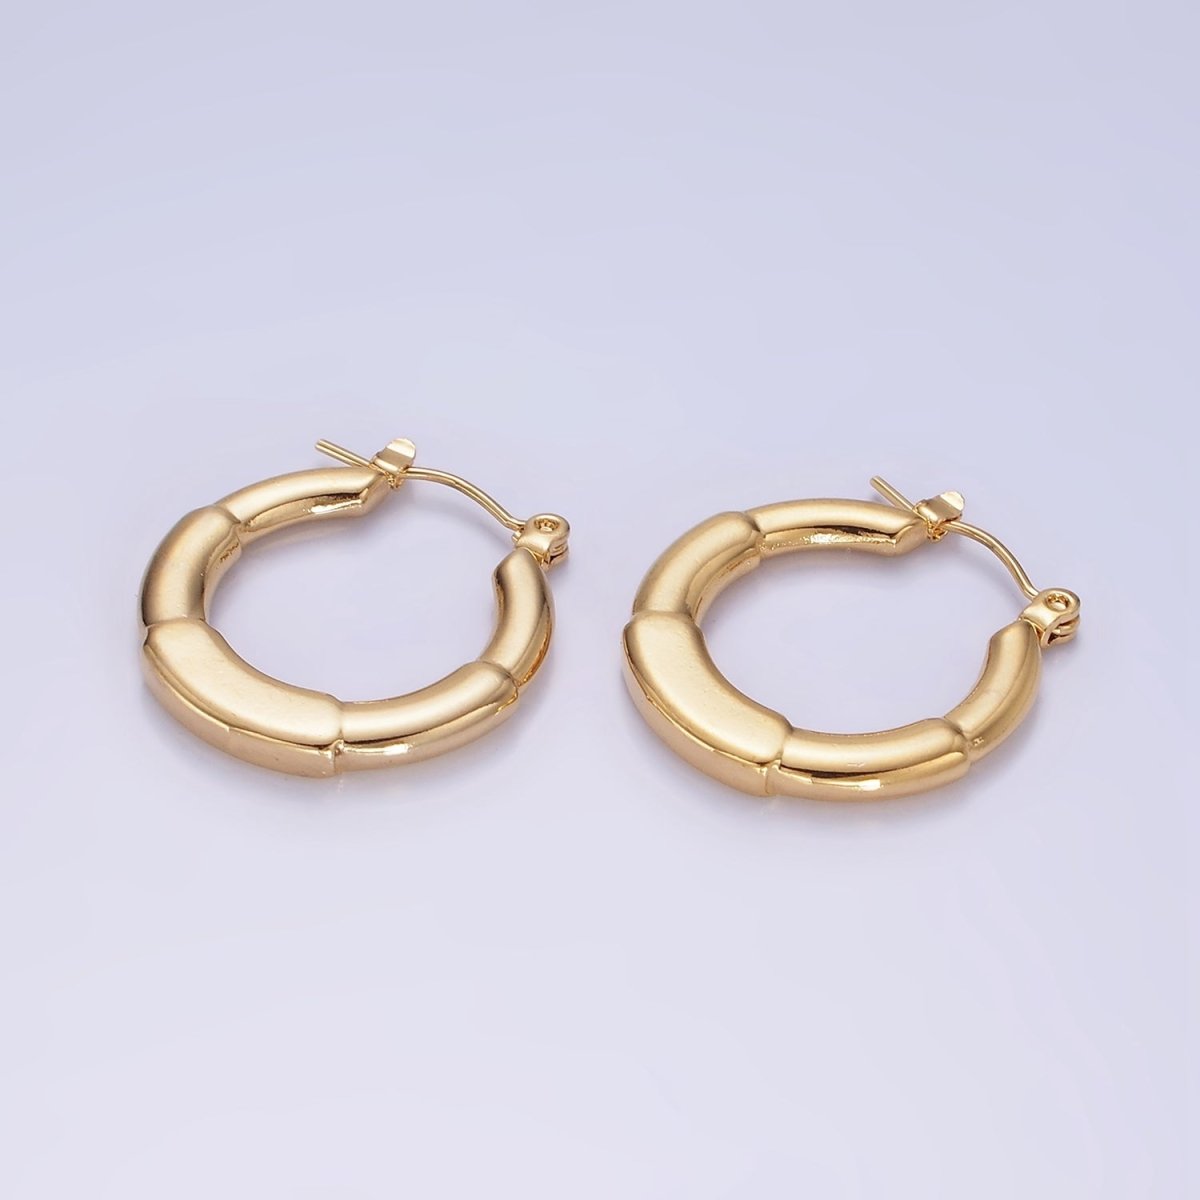 Stainless Steel 20mm Over-Edged Band Round Minimalist Latch Hoop Earrings | AE440 - DLUXCA